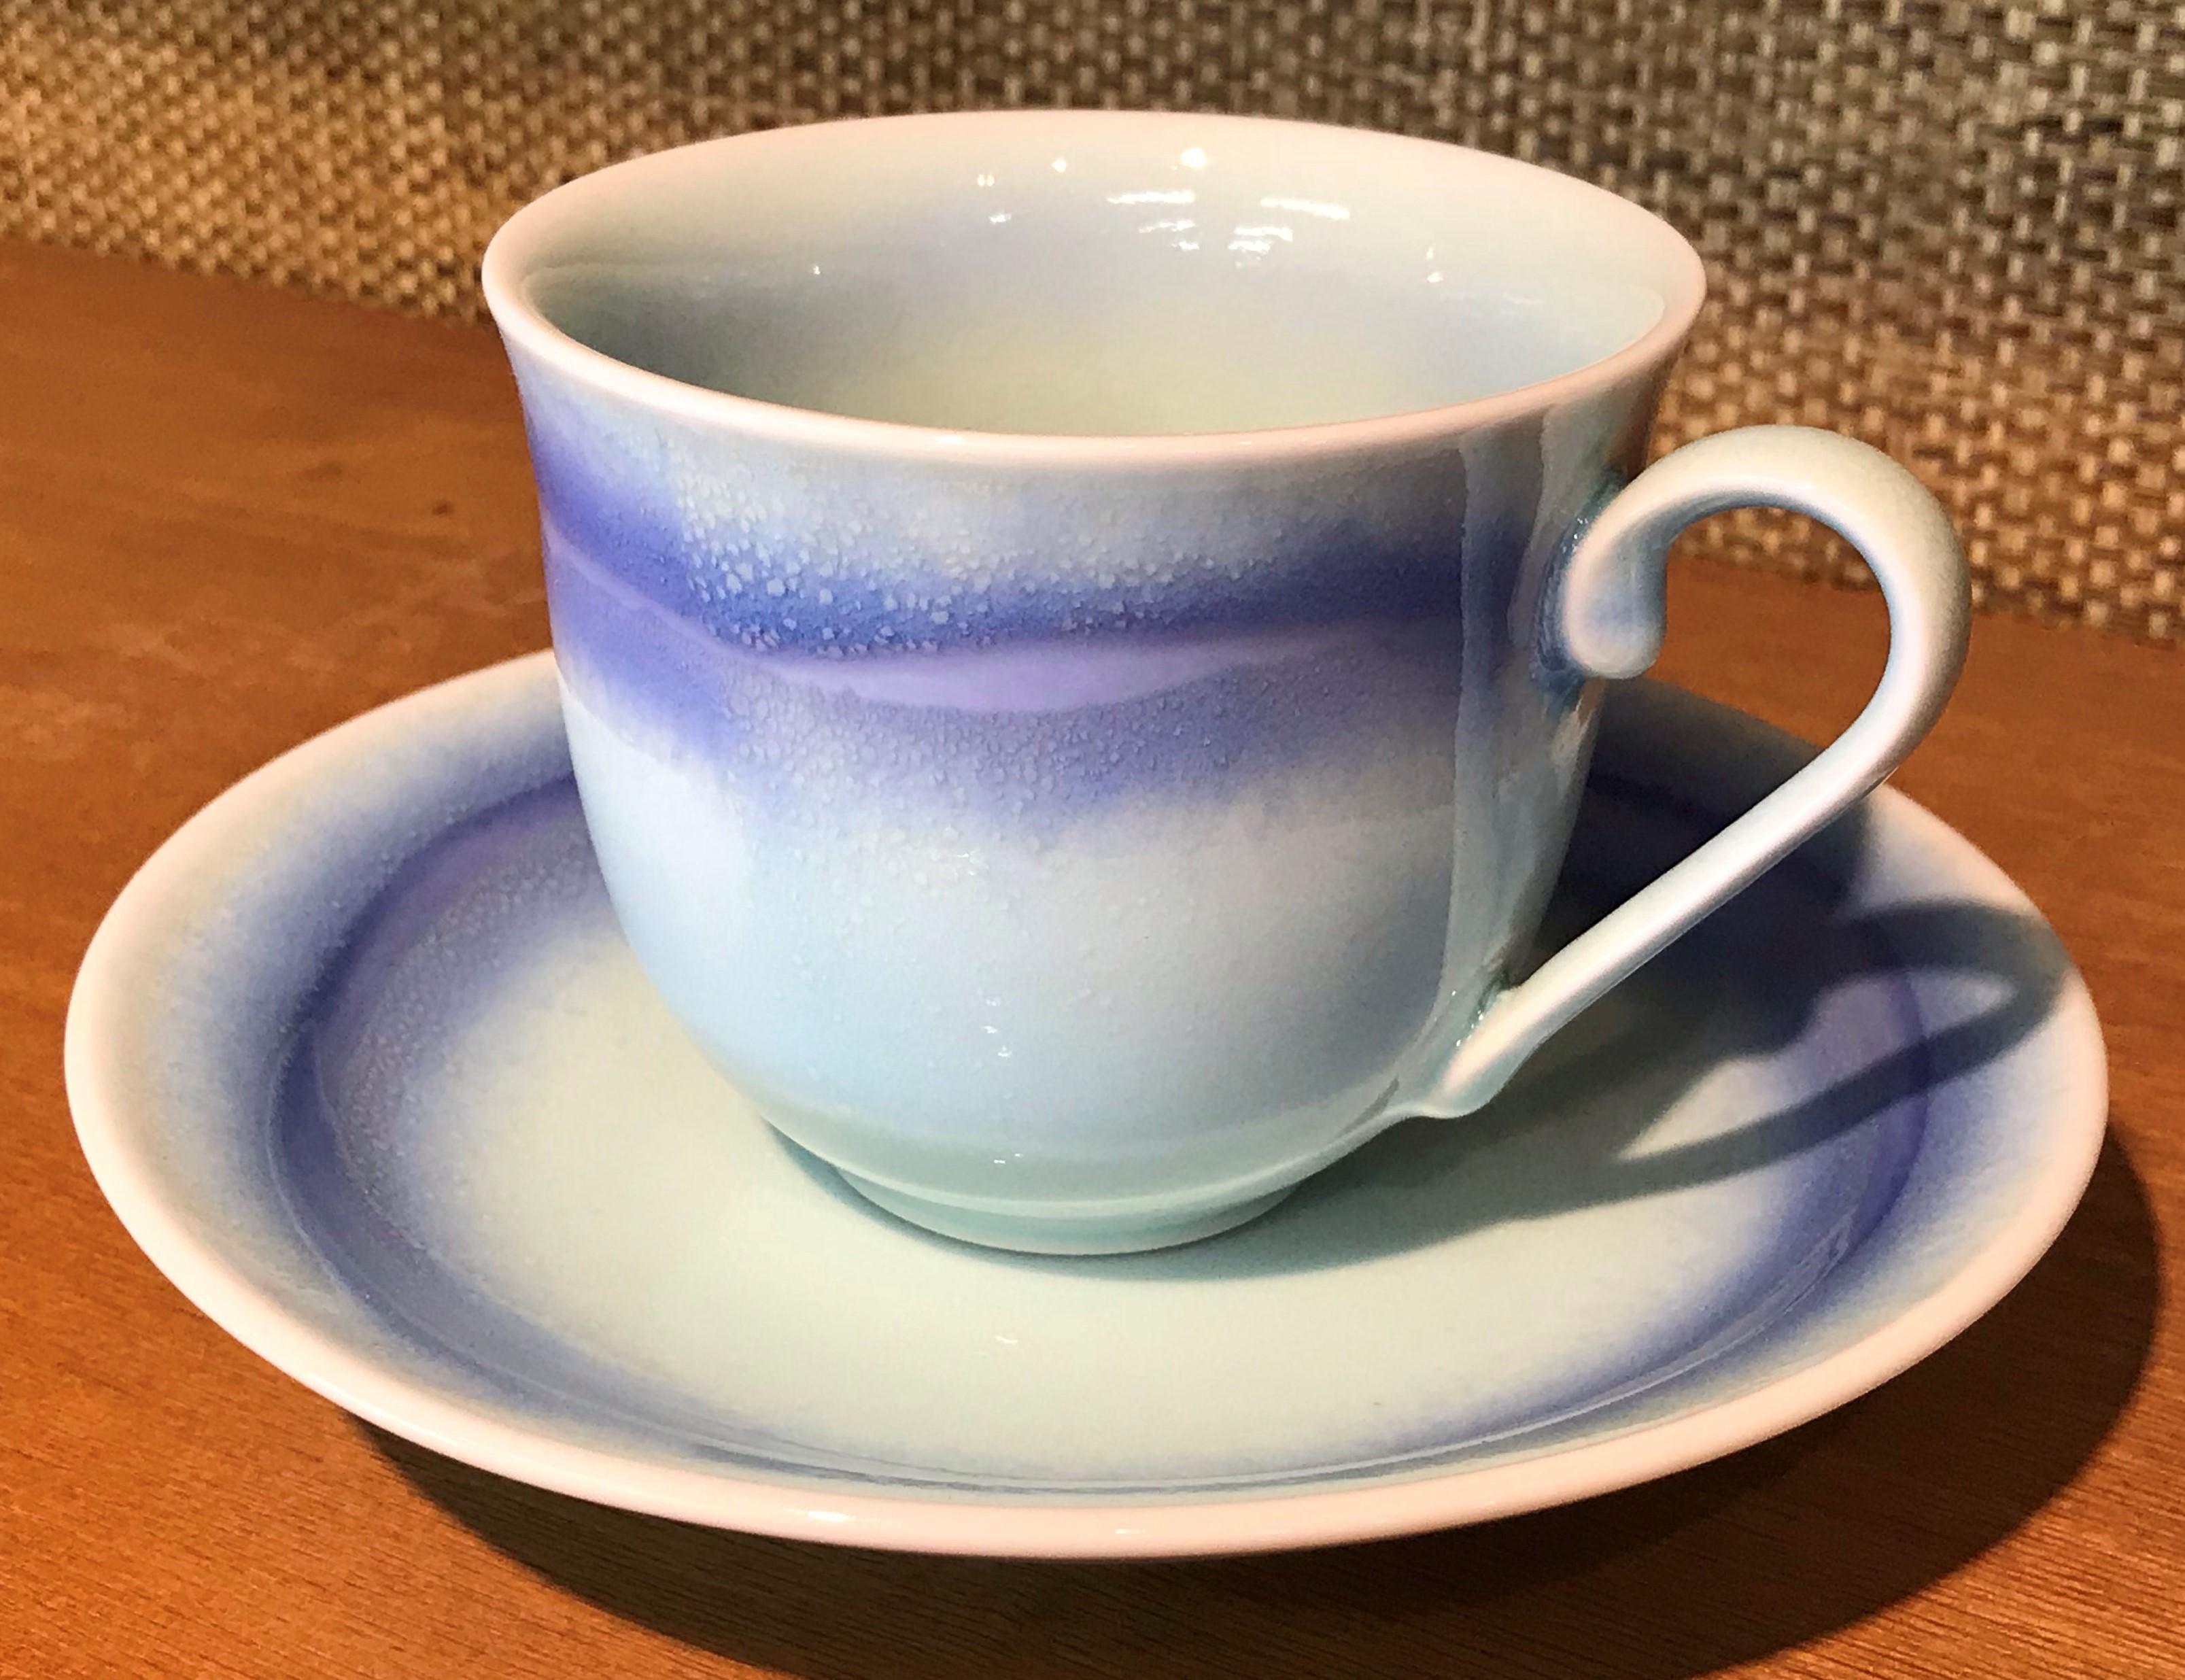 Exceptional Japanese contemporary porcelain cup and saucer, hand-glazed in stunning blue and white on a beautifully shaped body. This is a signed work by a highly acclaimed award-winning master porcelain artist from the Imari-Arita region of